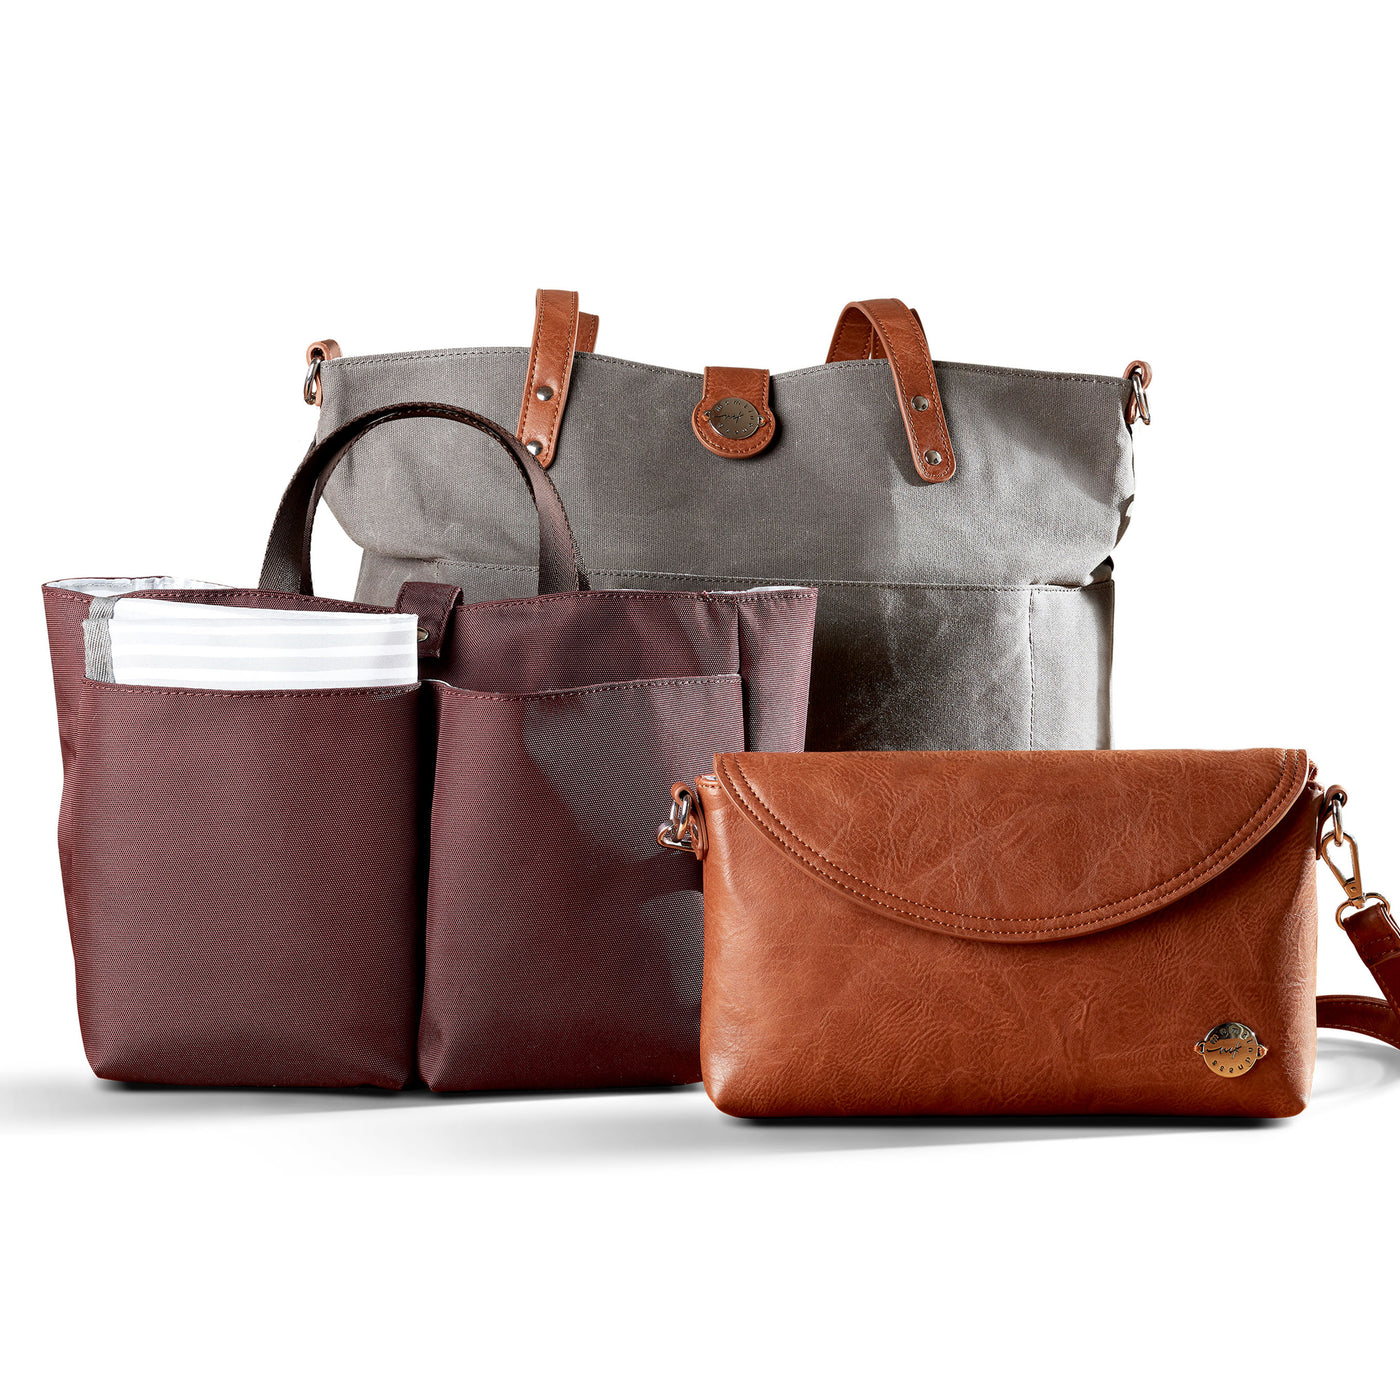 Grey Carry All Tote Trio shown with three included components; grey waxed canvas tote with brown vegan leather accents, brown vegan leather diaper clutch and burgundy multi-pocket organizer insert with carry handles.